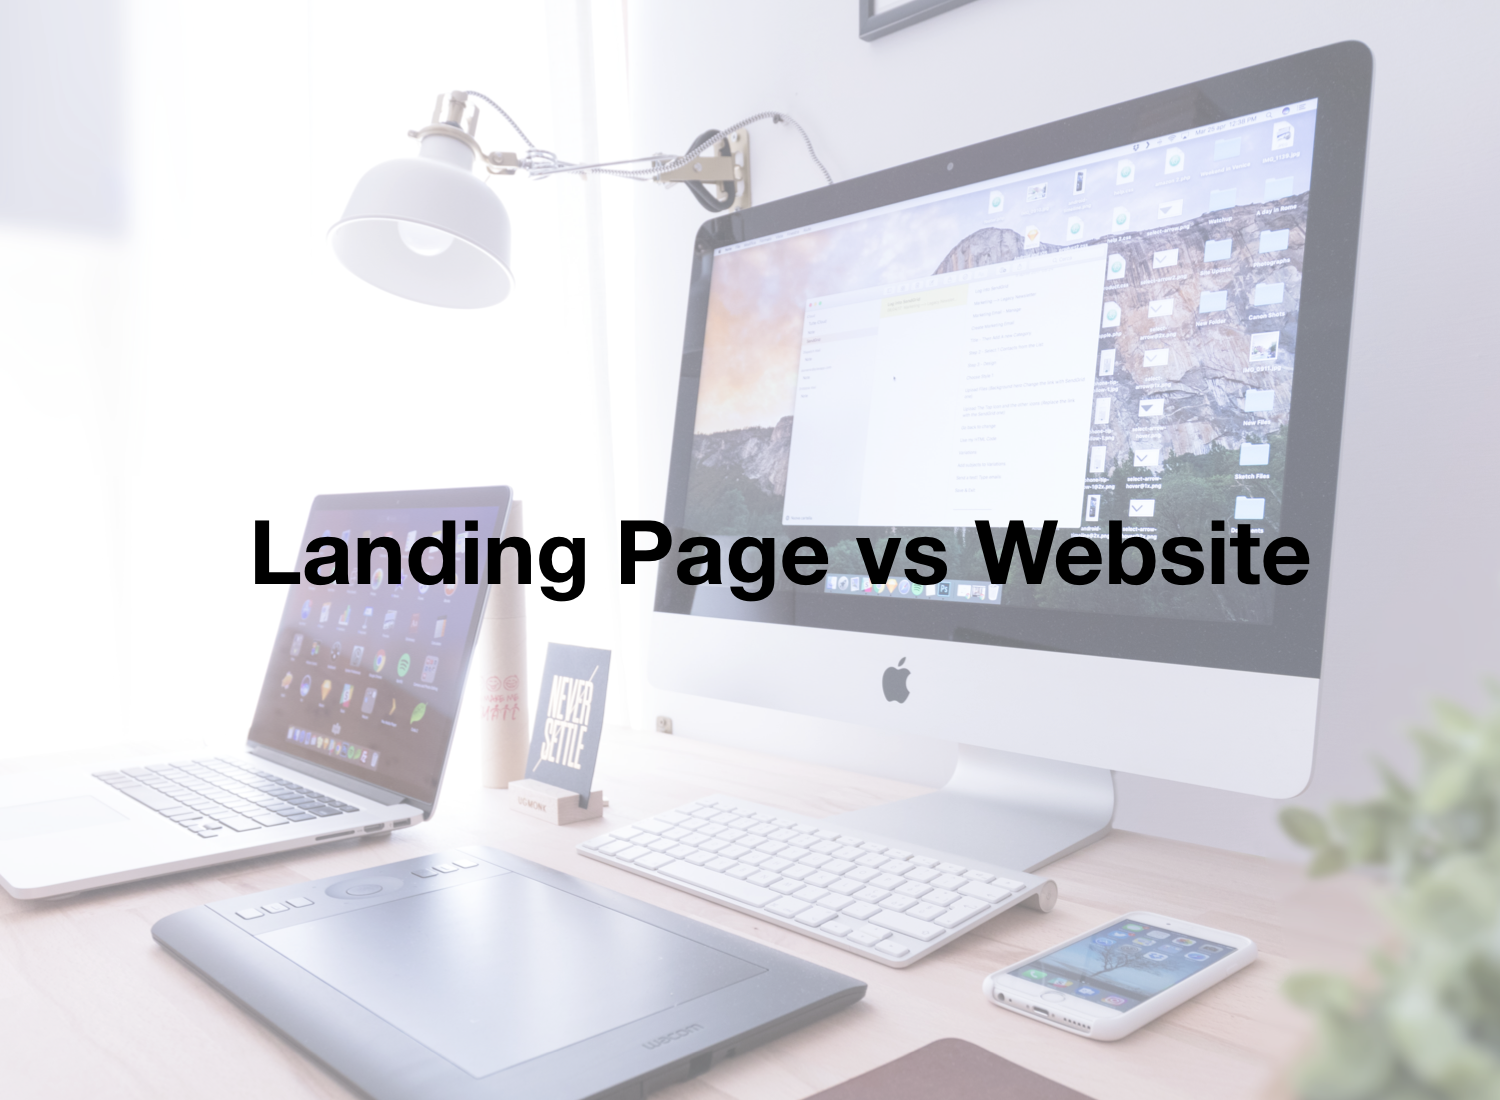 Landing Page vs Website: Which is Better for Your Business?